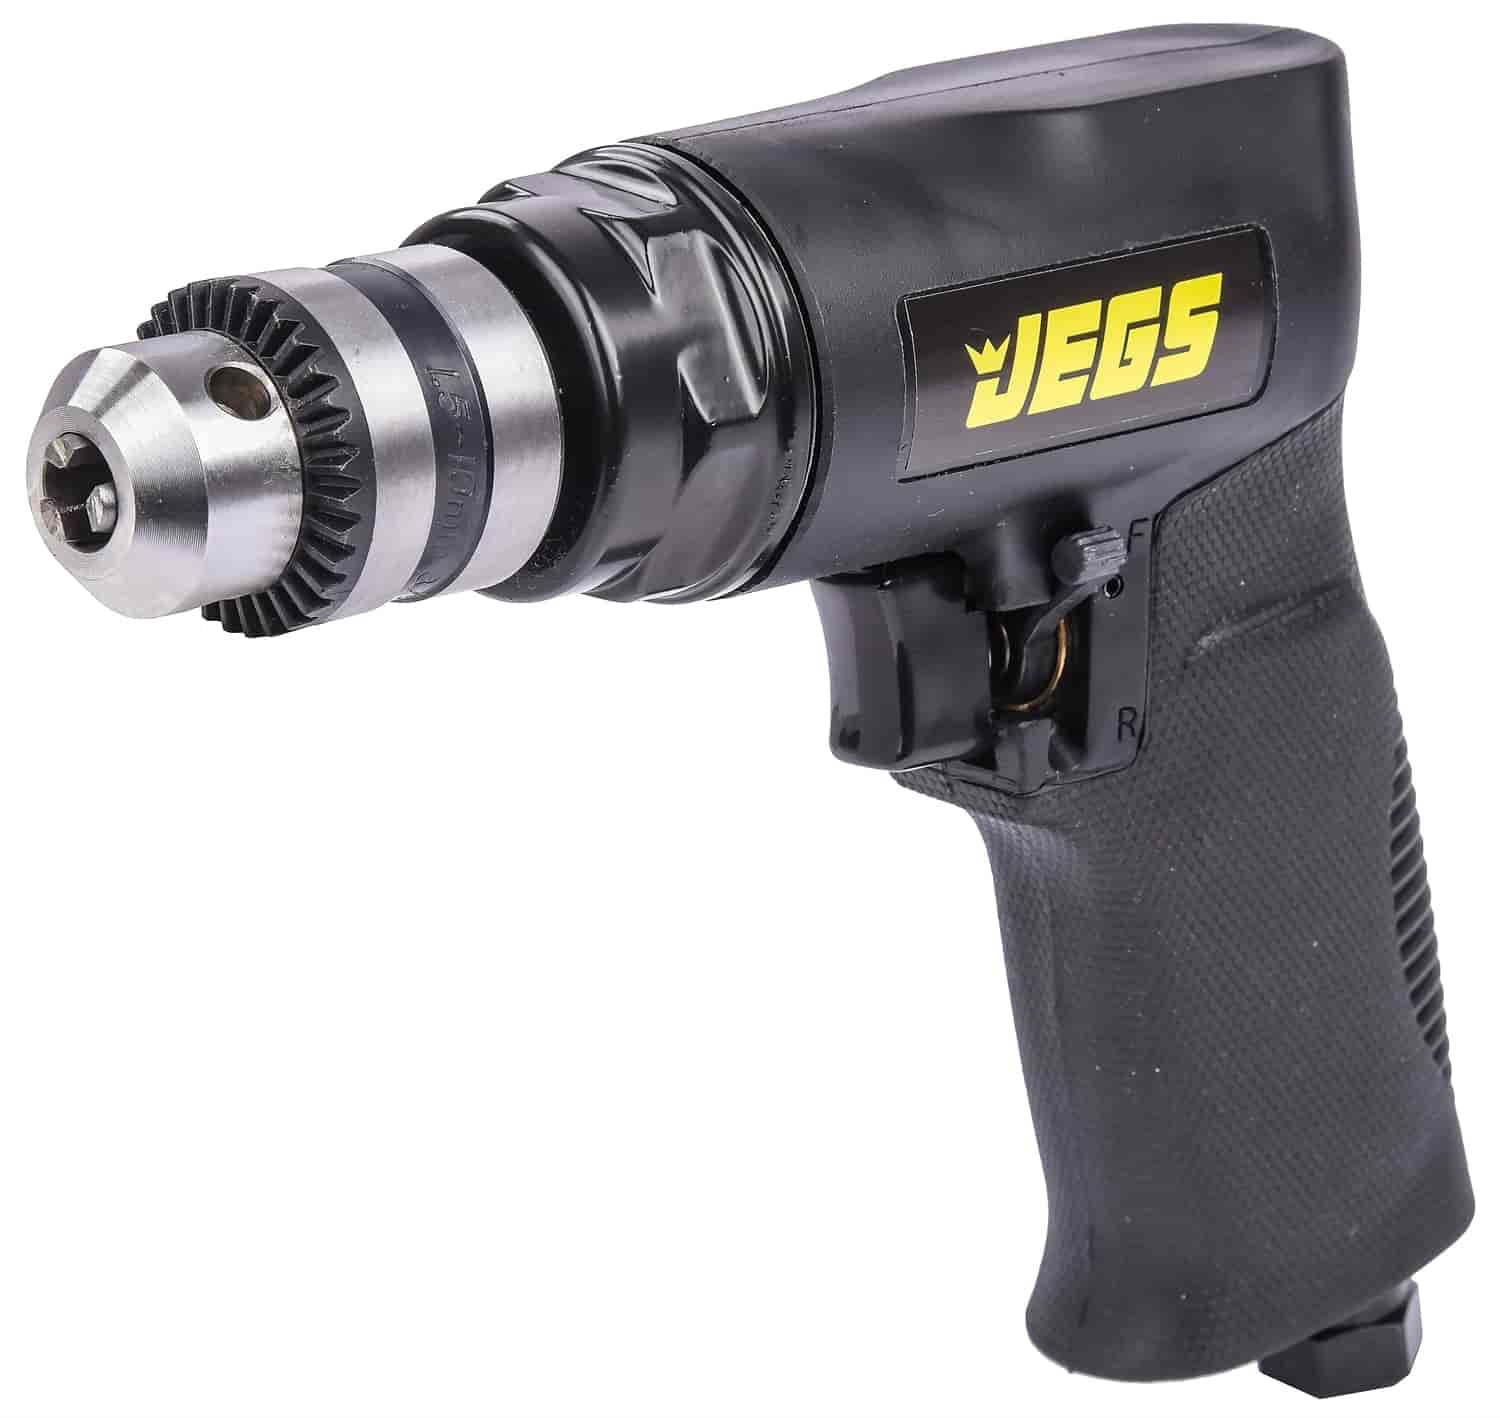 Reversible Air Drill [3/8 in. Chuck, 1,800 RPM]